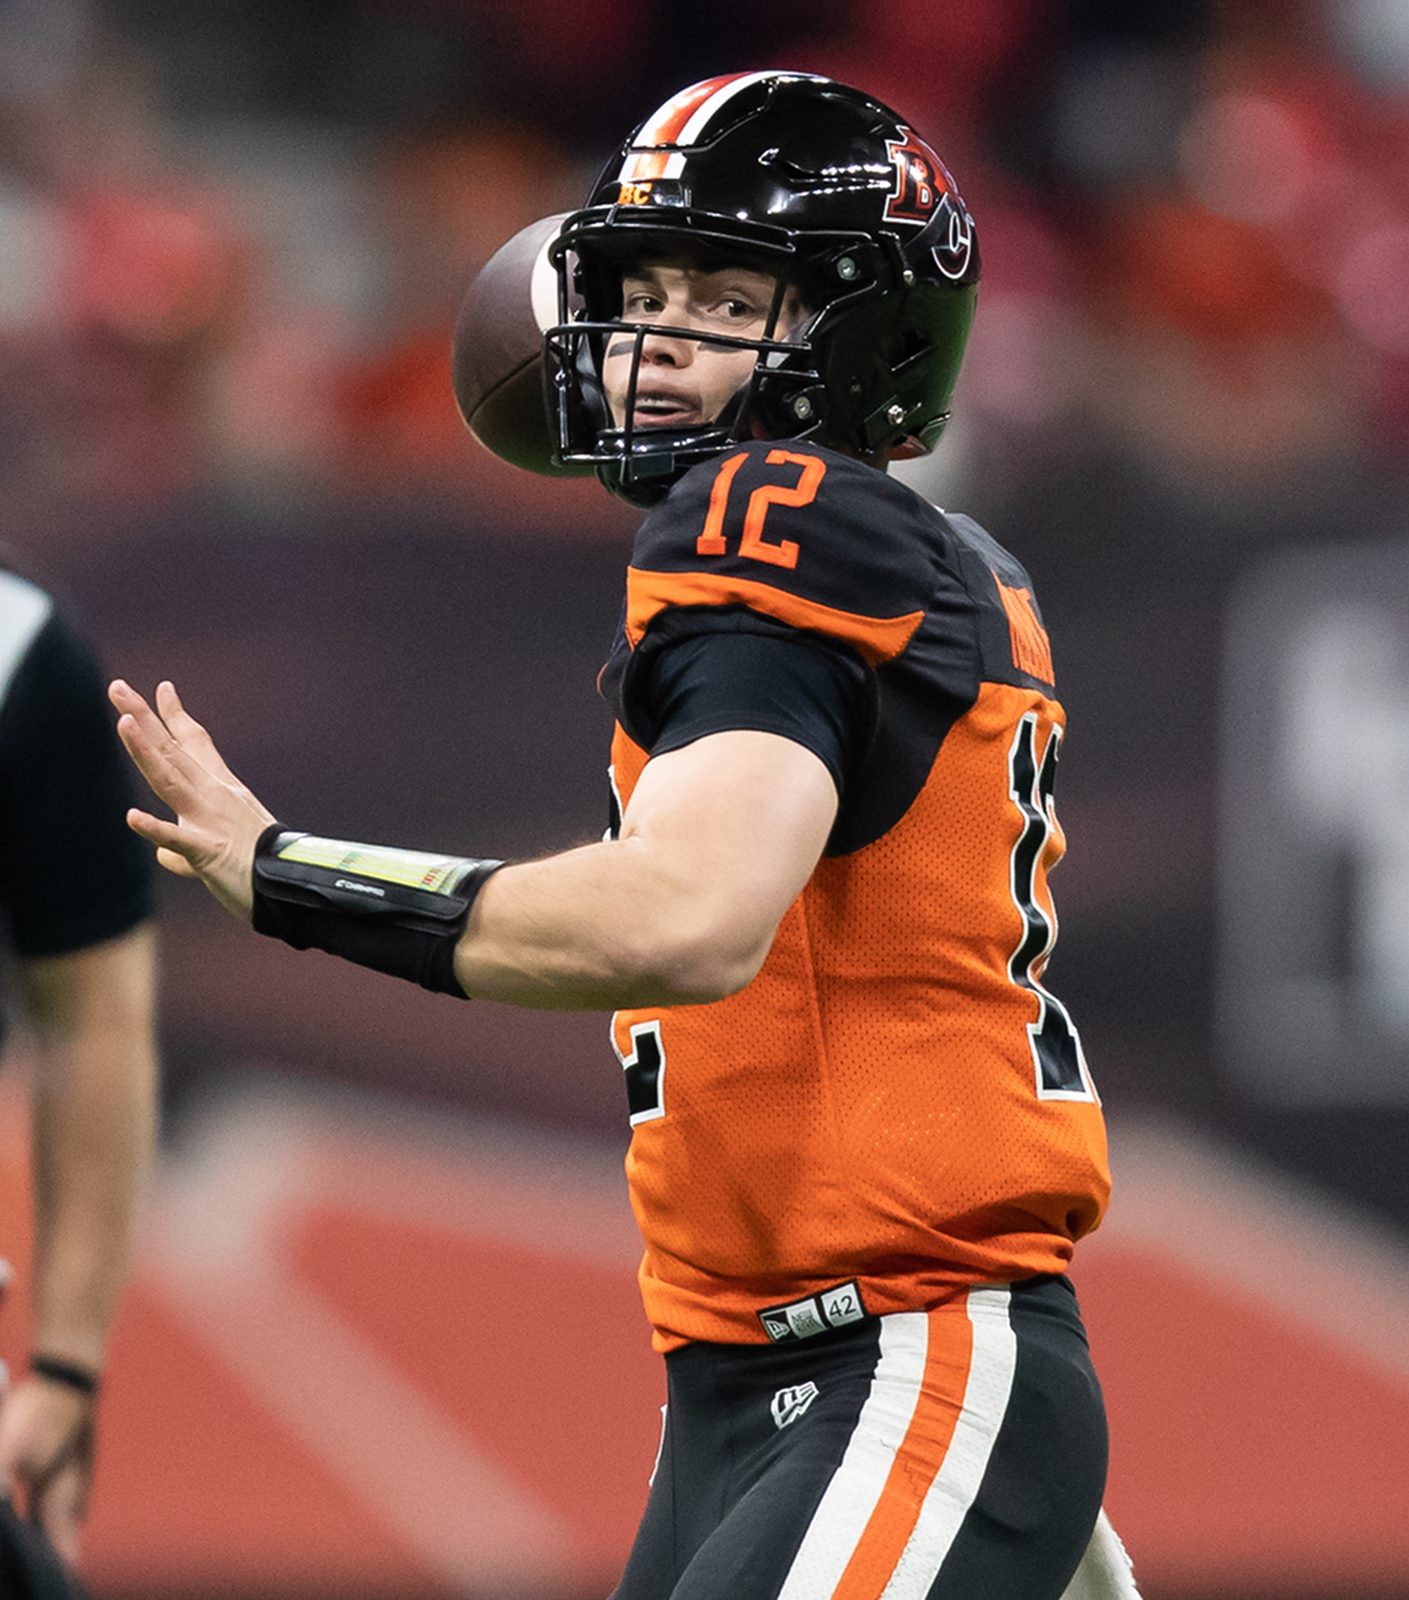 Always moving forward. | Nathan lives his life with a sense of urgency on and off the field, and it shows in how he runs his offense and lives his life after the games end. | BC Lions